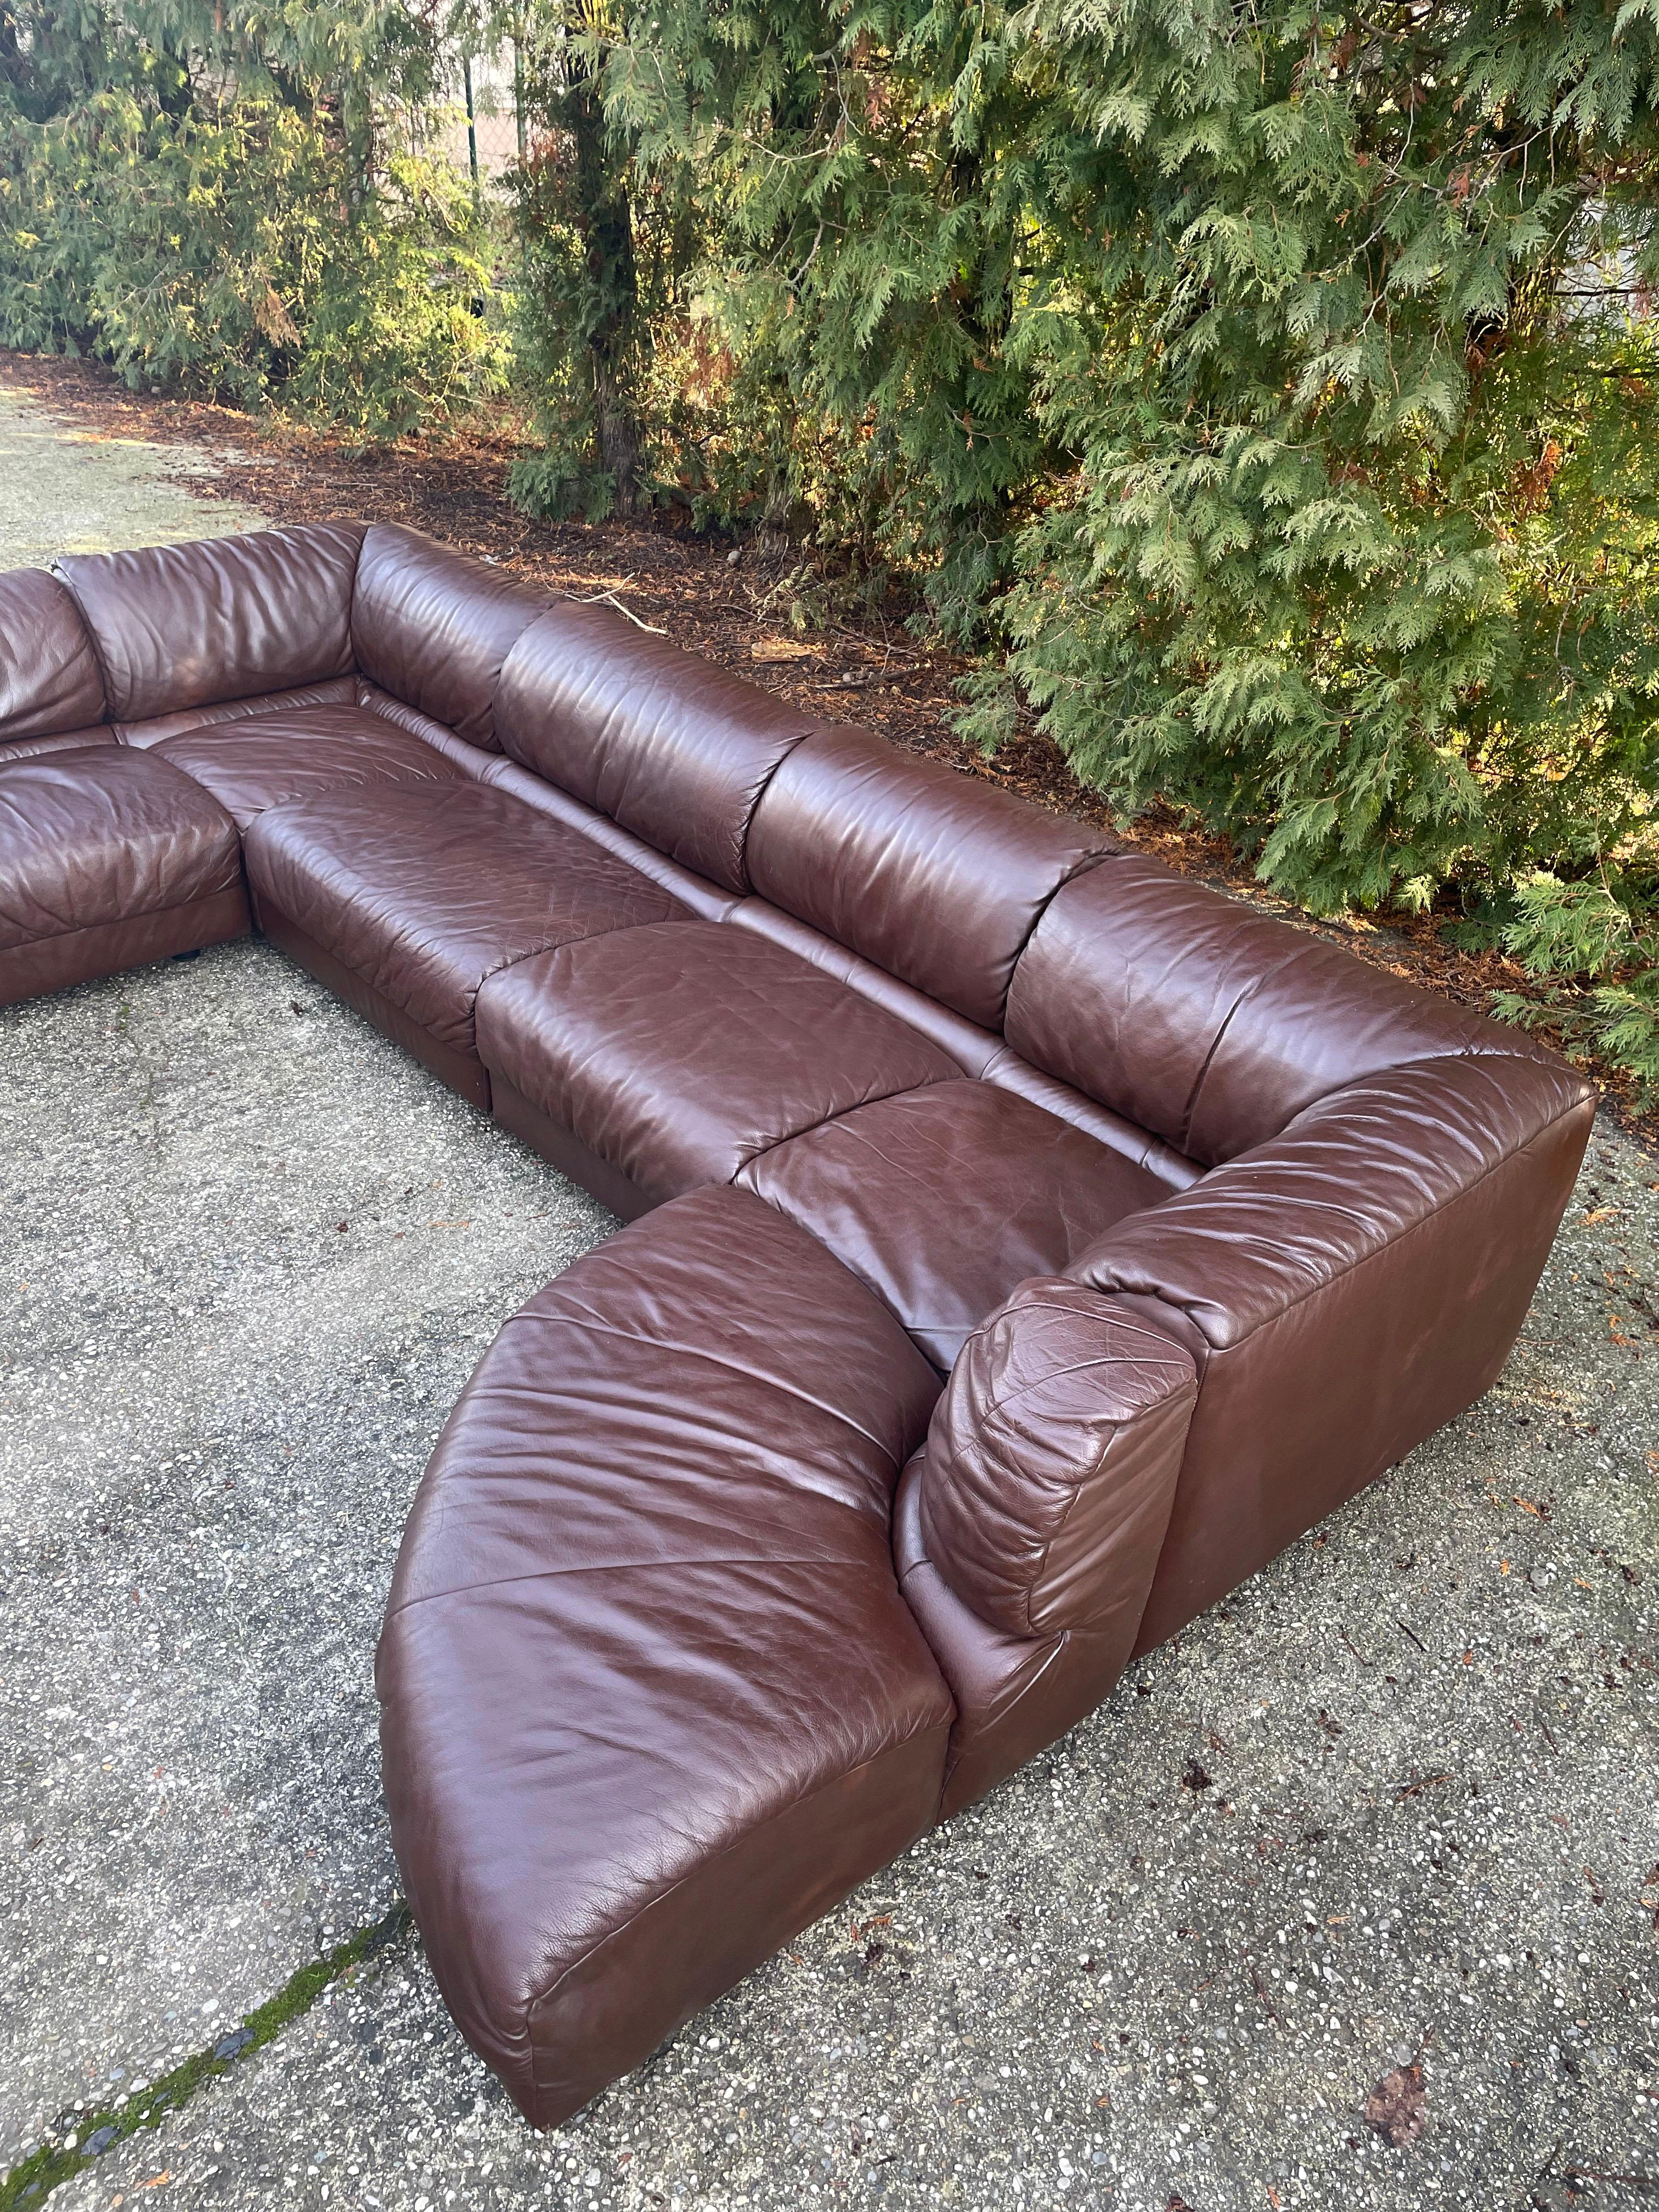 1970s sectional sofa in dark brown leather manufactured by Laauser (the producers label is missing)

7 modular sections can be arranged in many combinations

The sofa is upholstered in a very nice thick supple leather

This sofa is in its